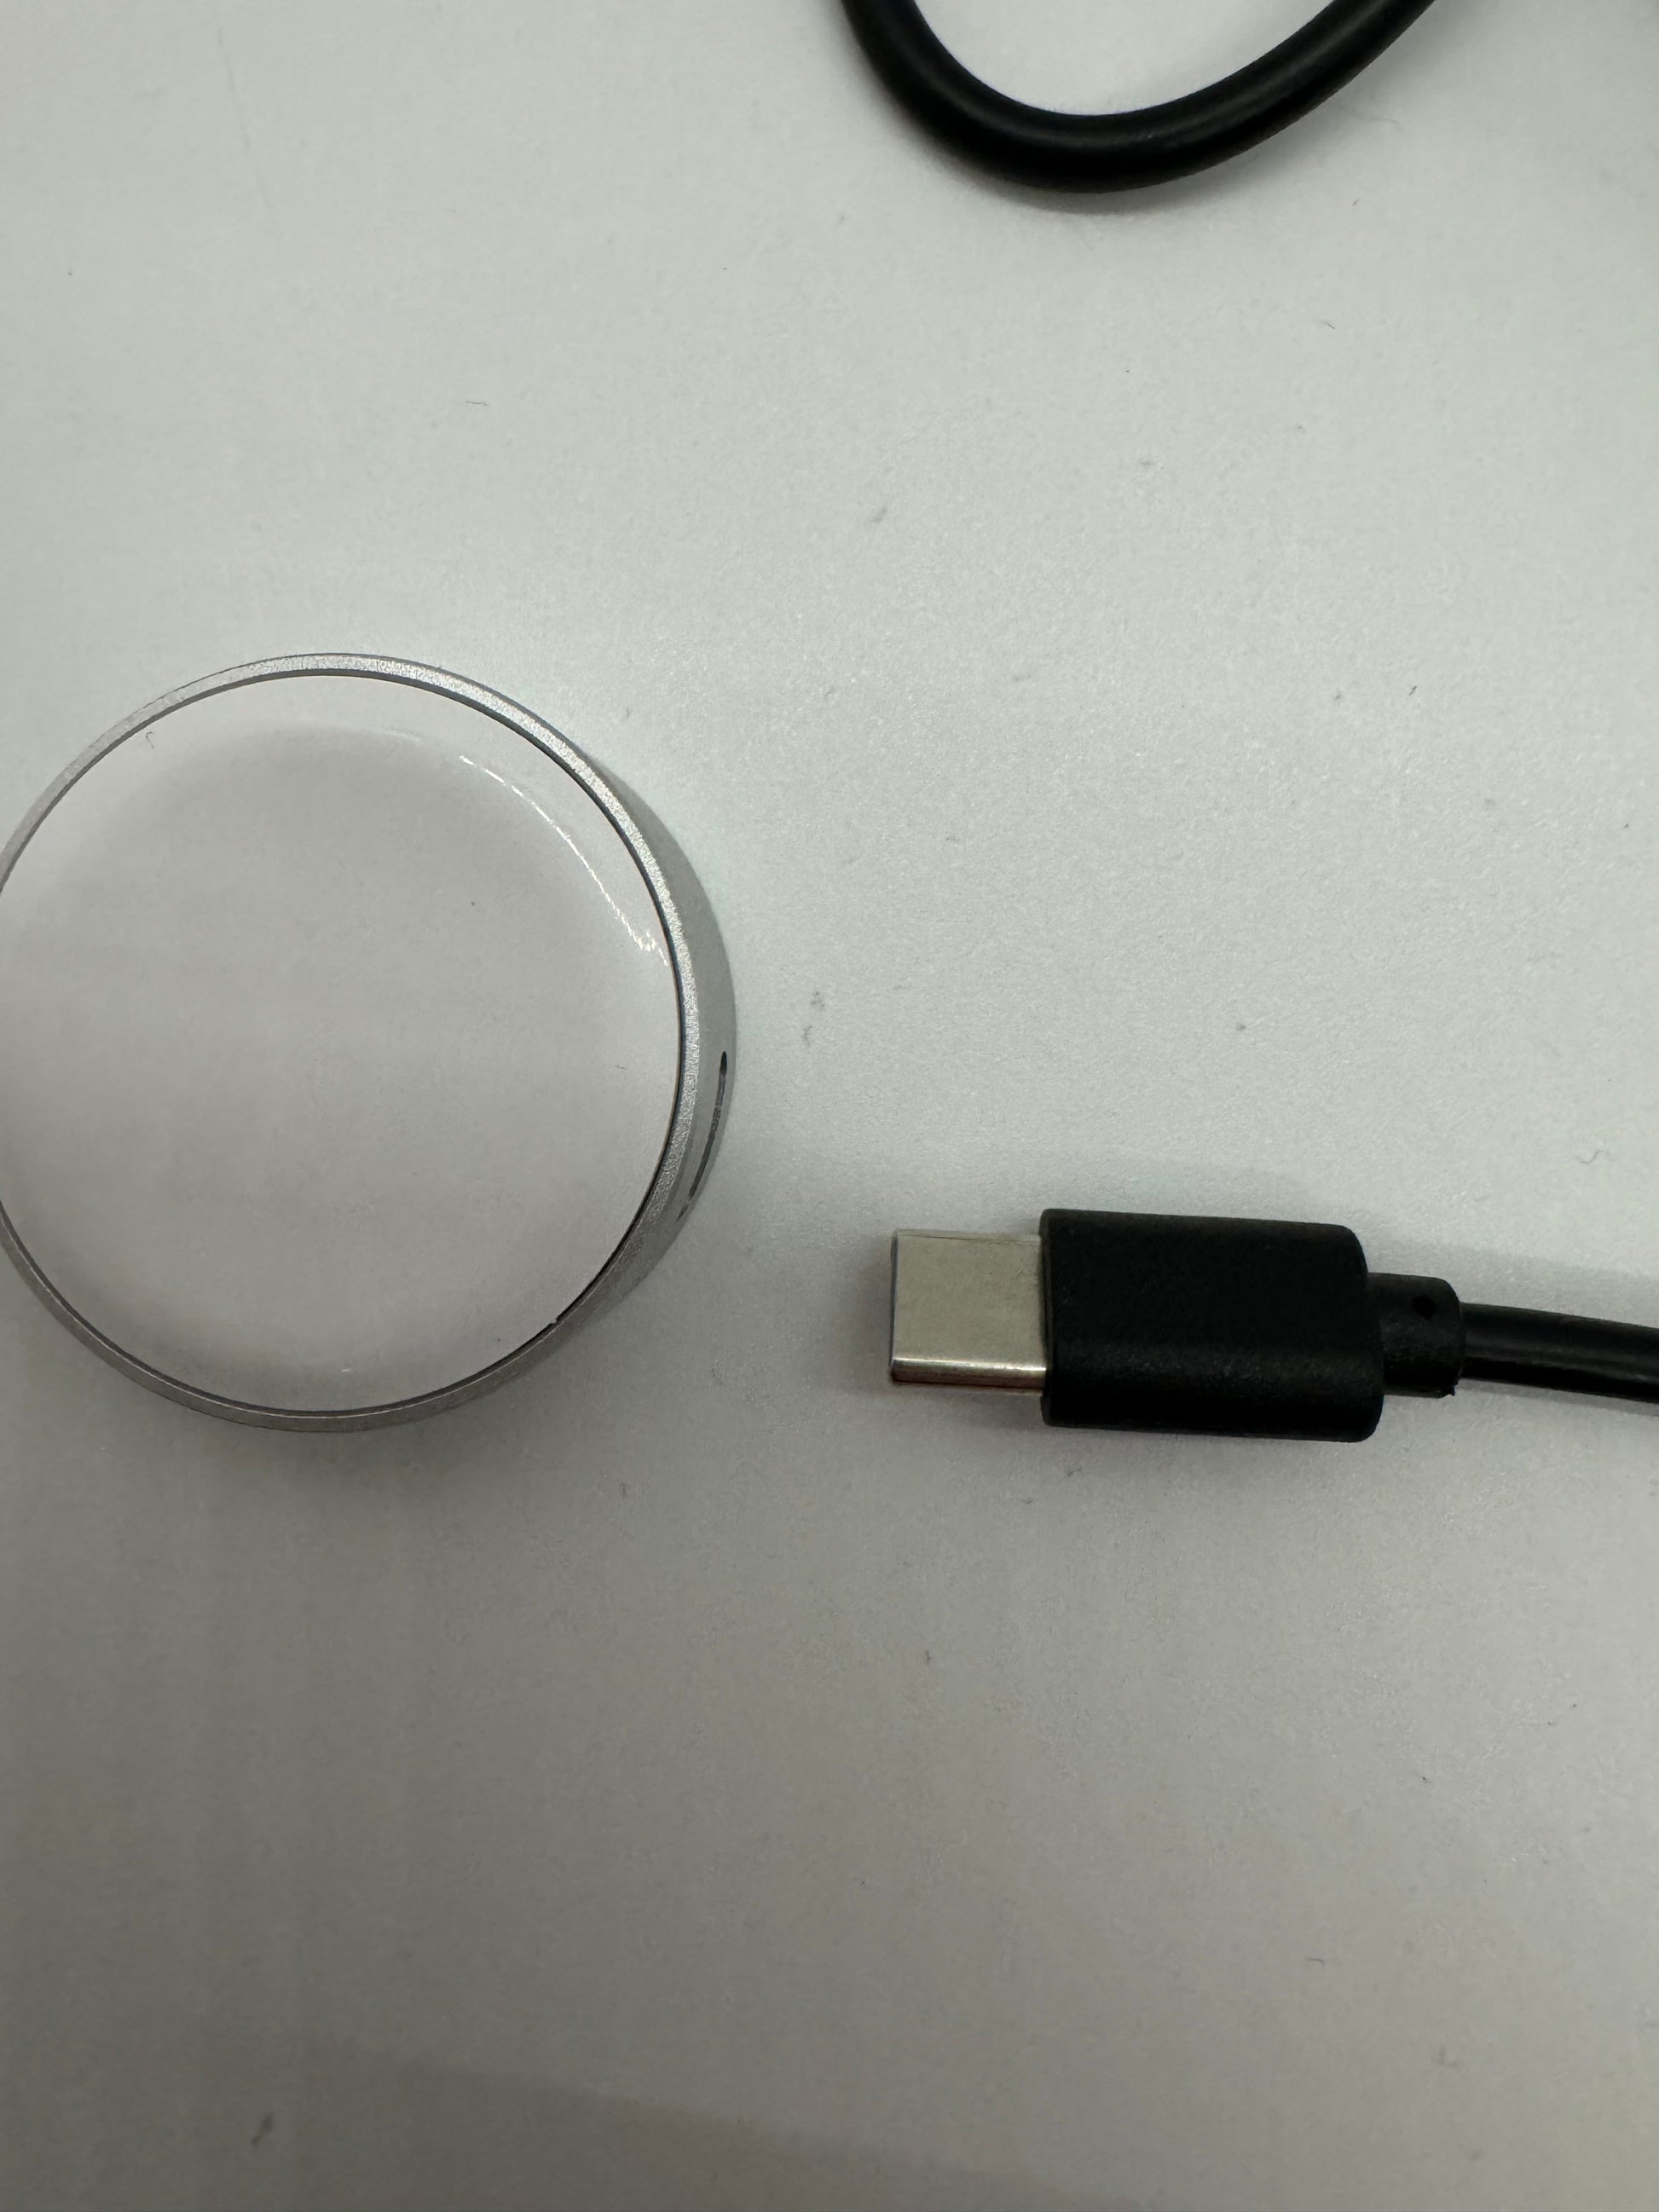 The picture shows two objects on a white surface. On the left side, there is a round object that appears to be a small mirror or a metal disk. It has a reflective surface and a thin metal edge. On the right side, there is a black cable with a USB connector at the end. The USB connector is silver and rectangular in shape.